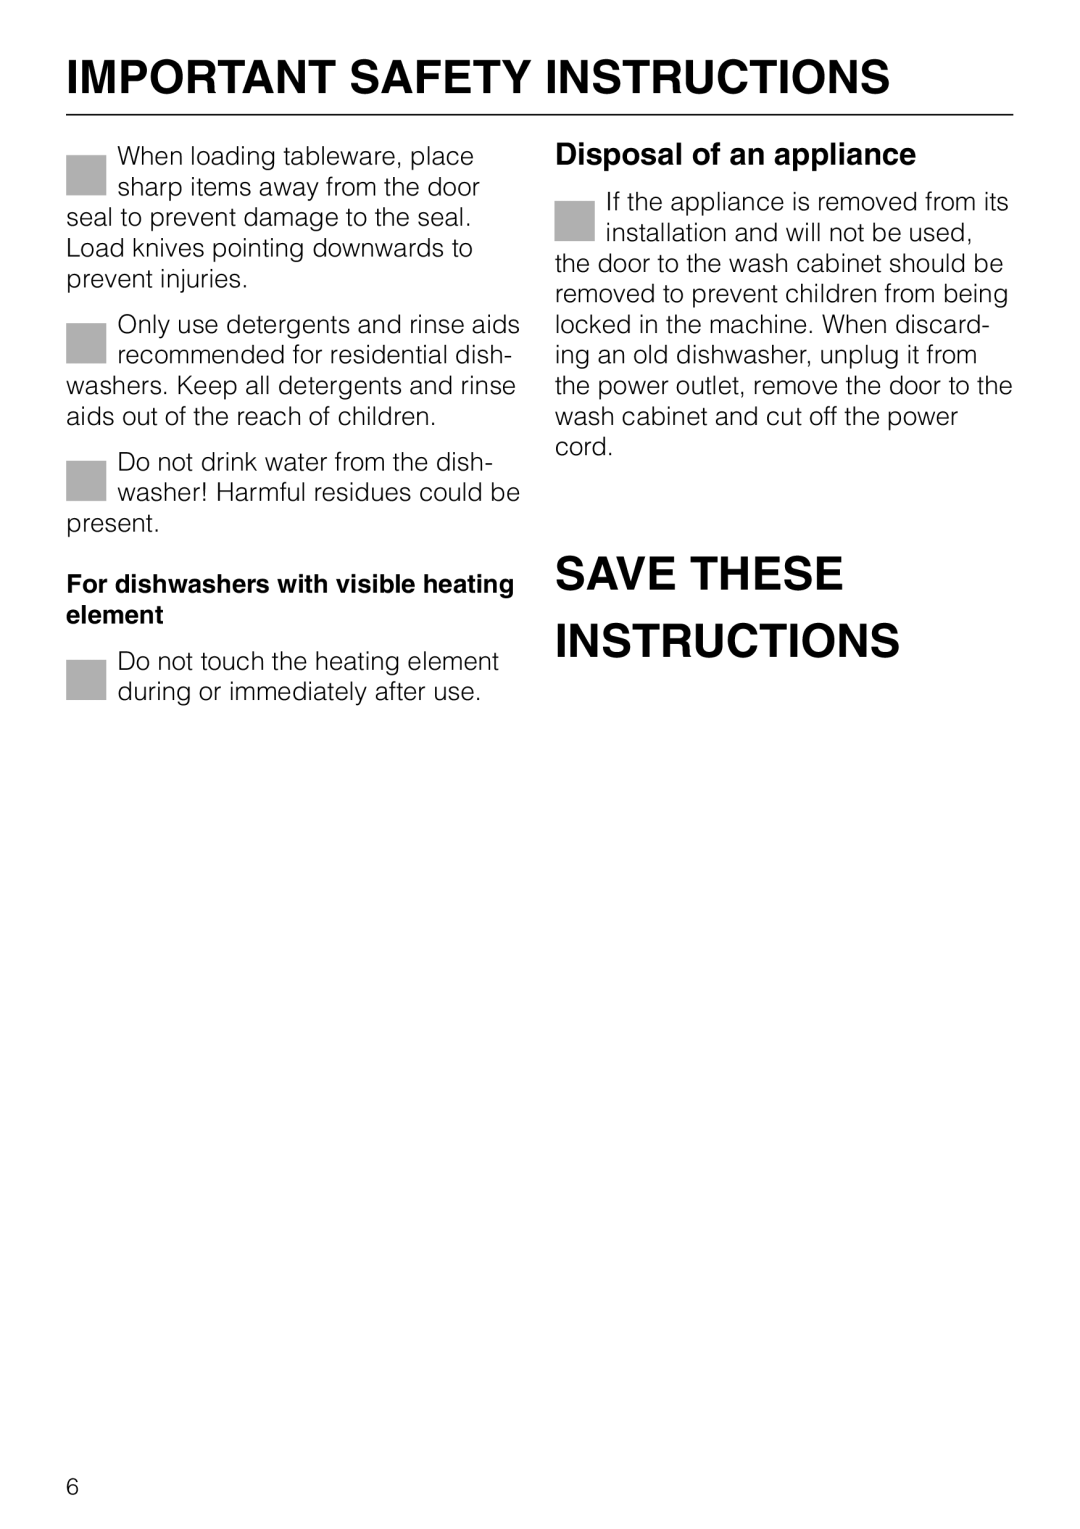 Miele G 841 PLUS, G 841 SC PLUS manual Save These Instructions, Disposal of an appliance, Important Safety Instructions 